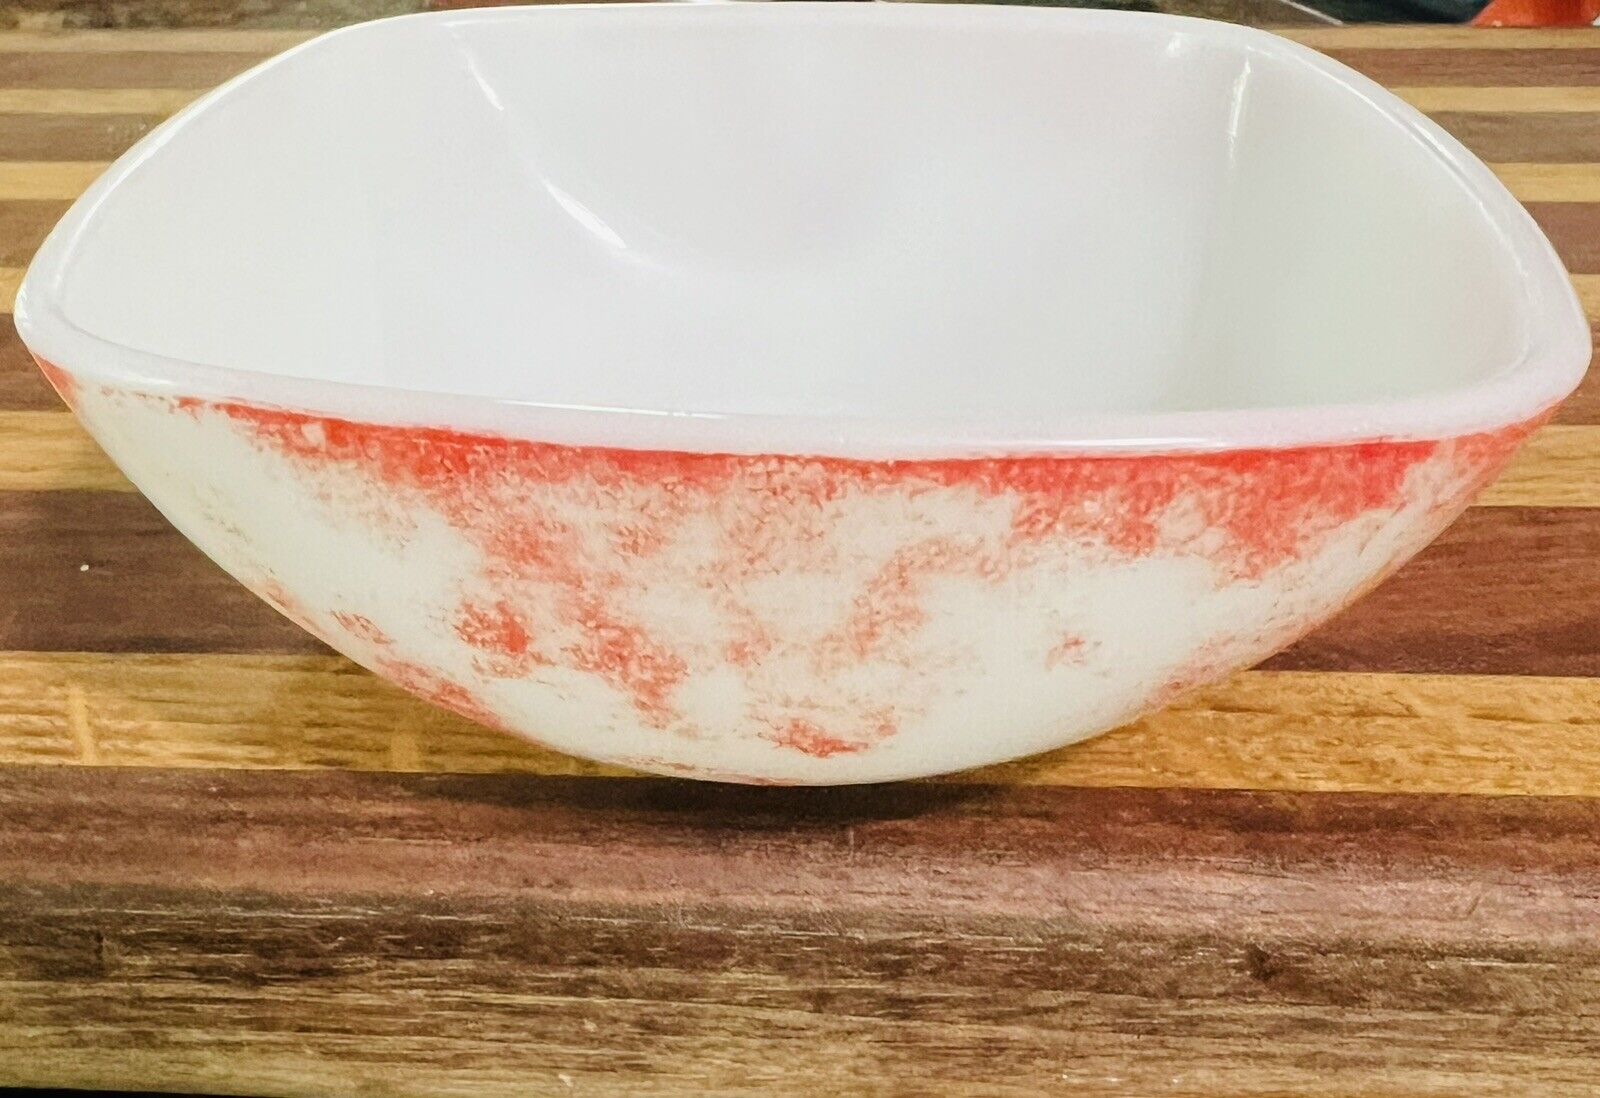 Vintage Pyrex 410-12  Ounce Red & White Marbled Bakeware- Rare Colors Look